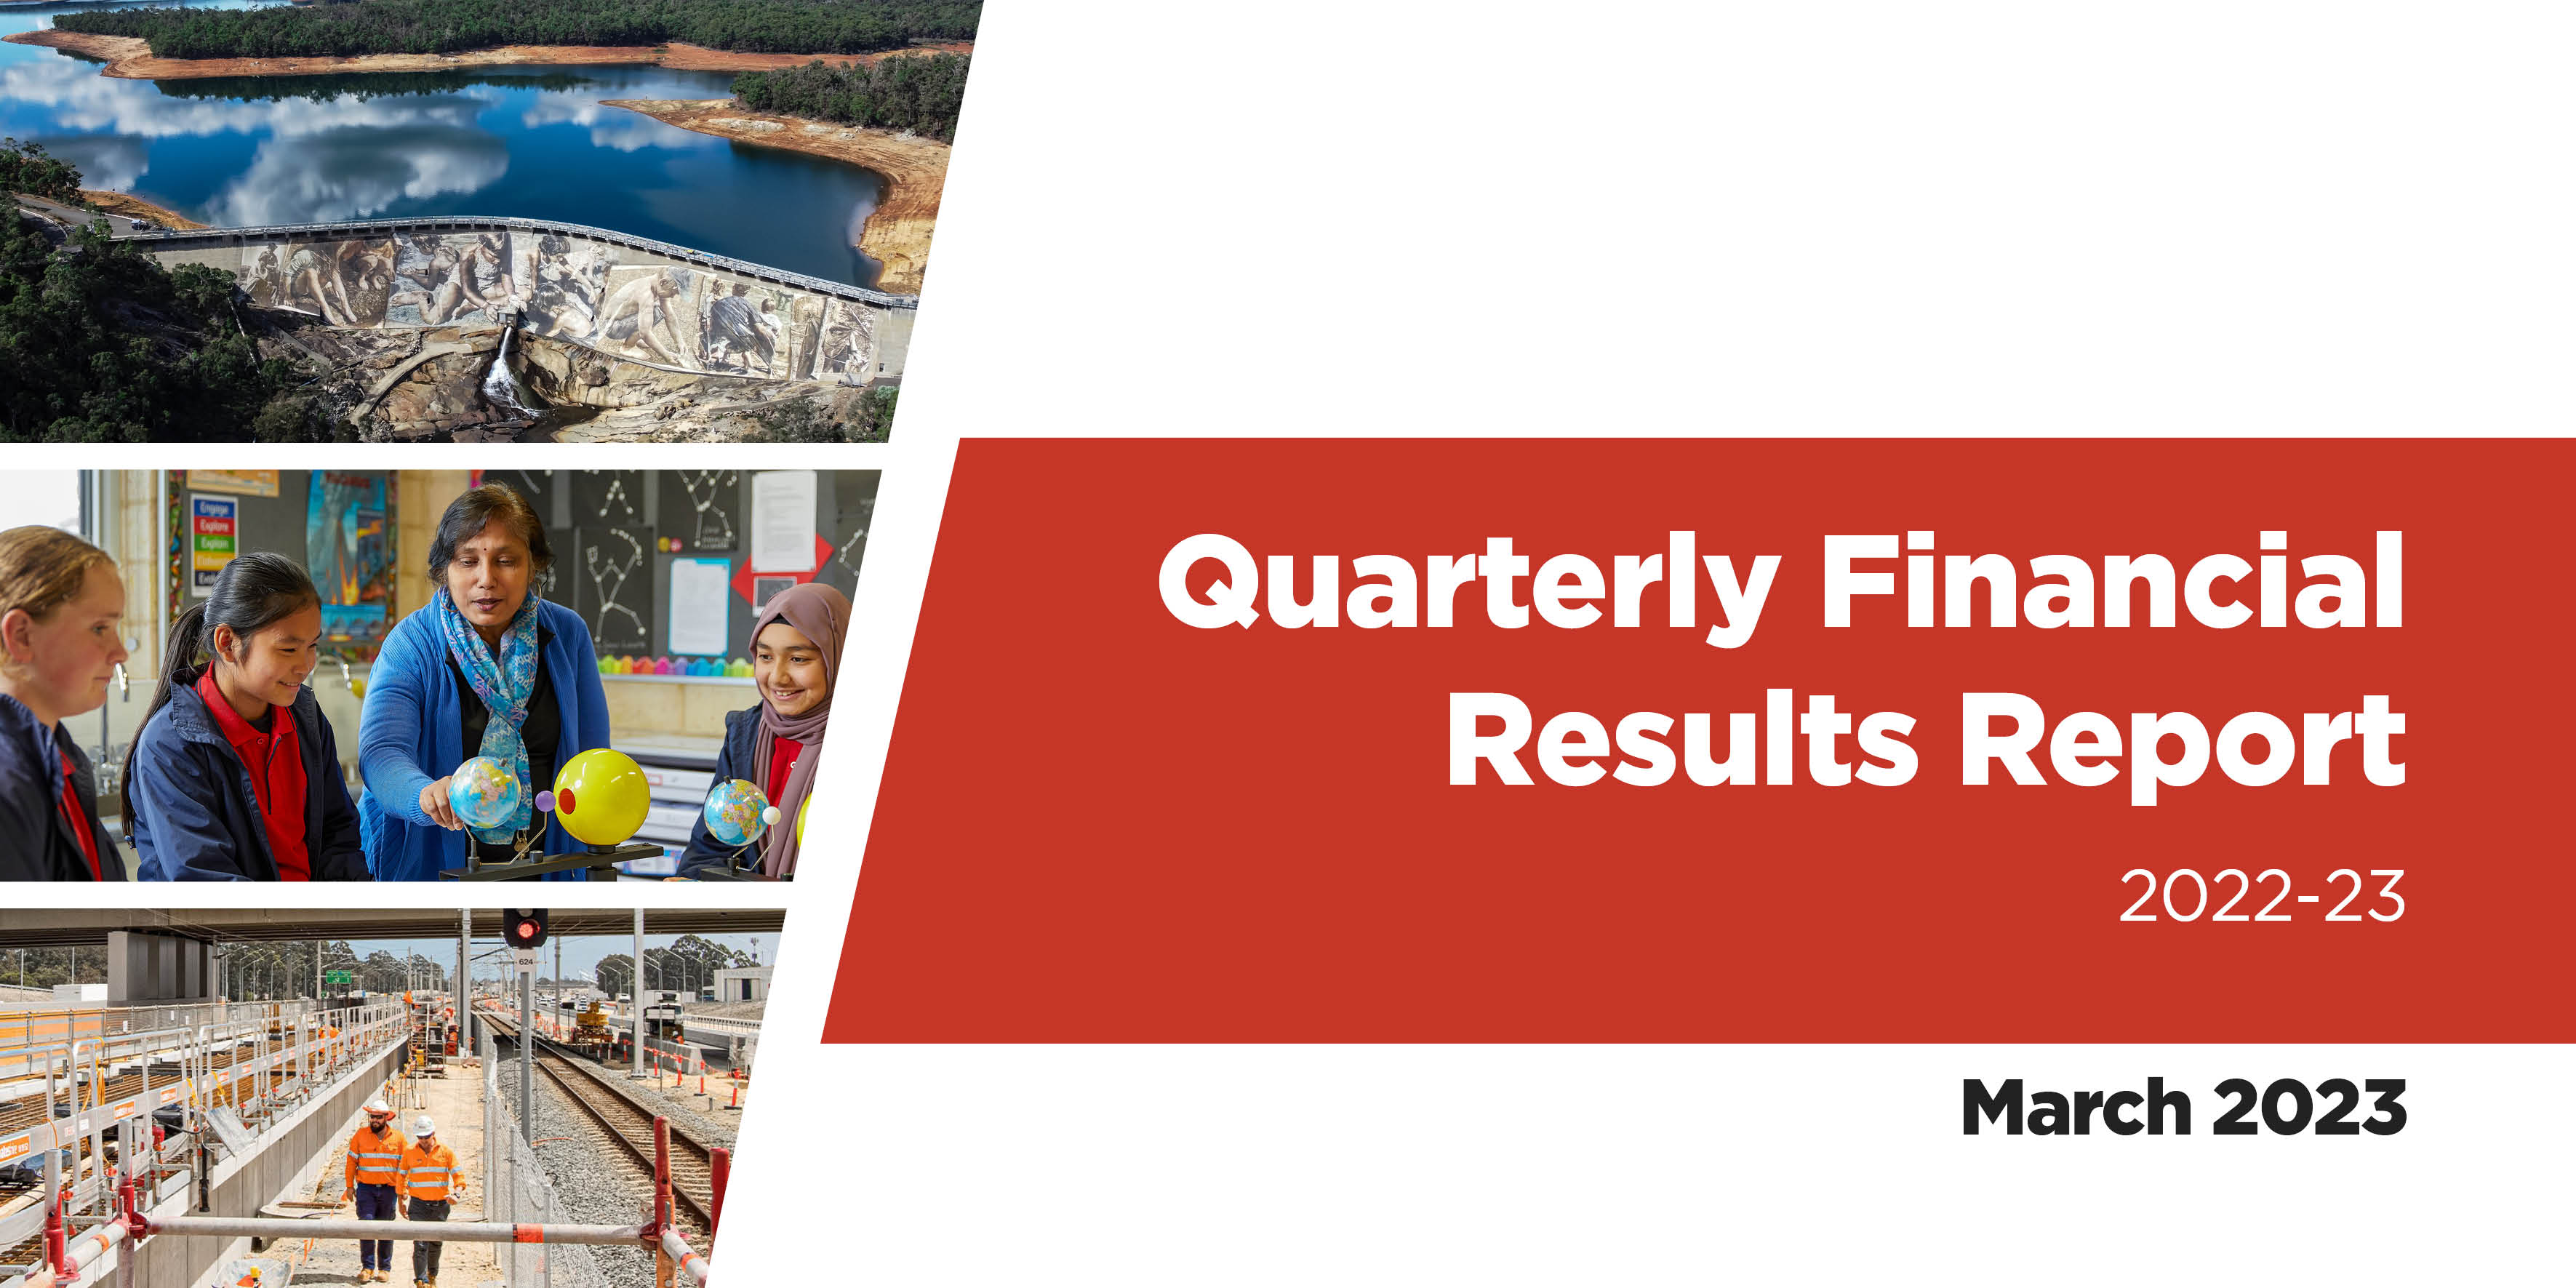 Graphic of the cover of the Quarterly Financial Results Report March 2023